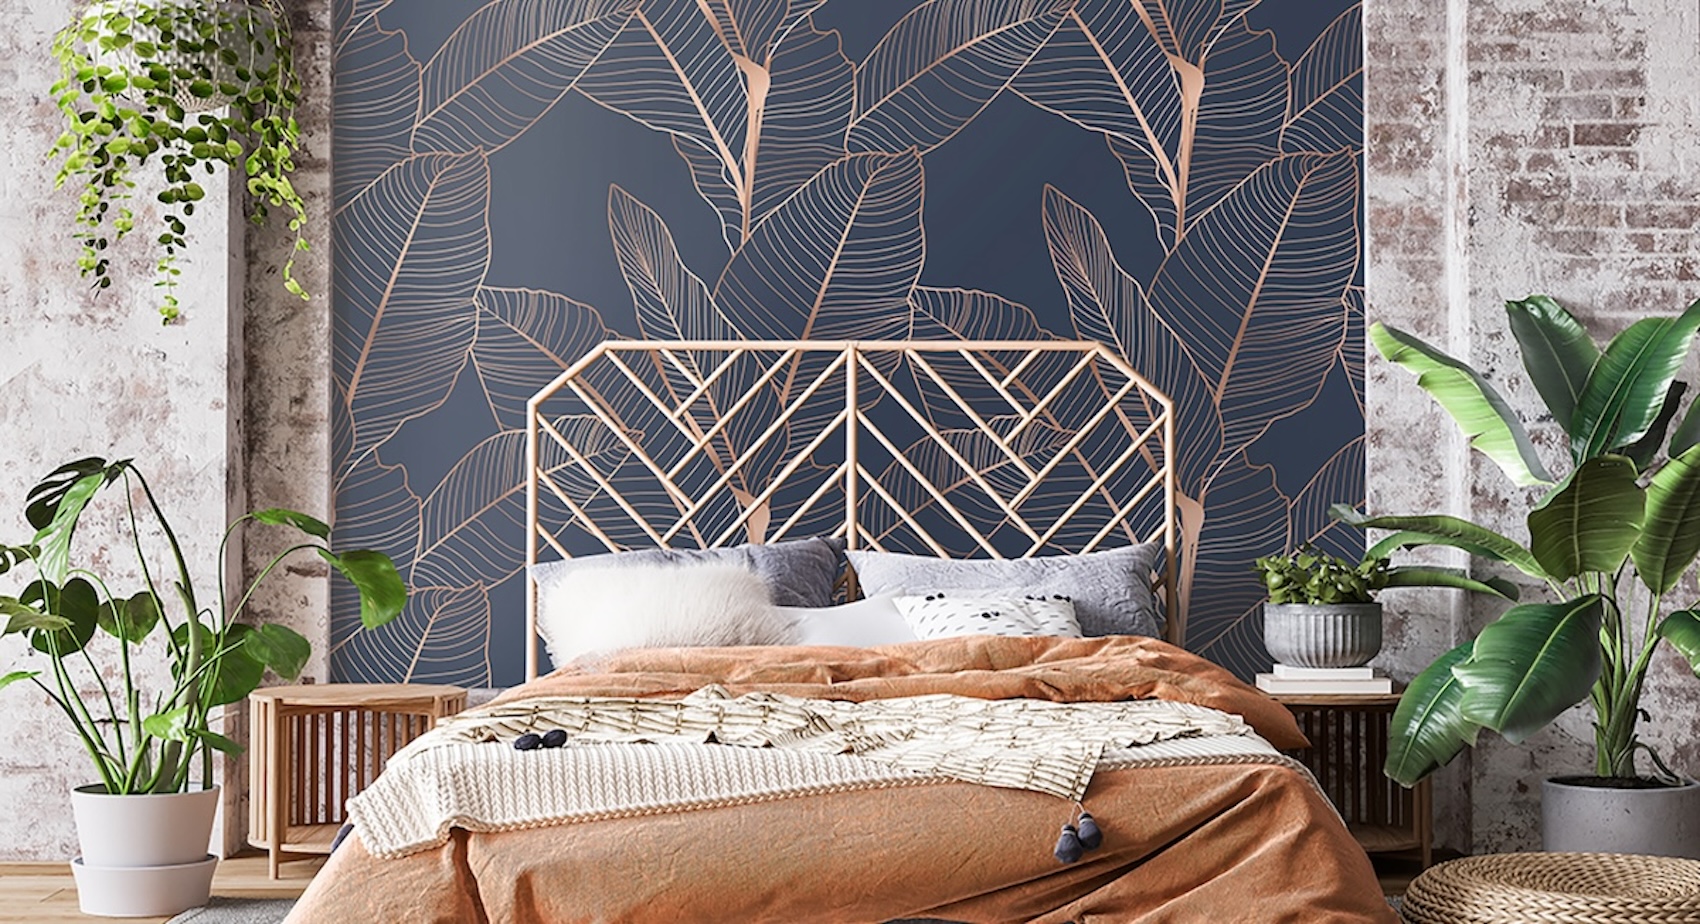 Mural of a banana leaf pattern in copper on blue behind a bed